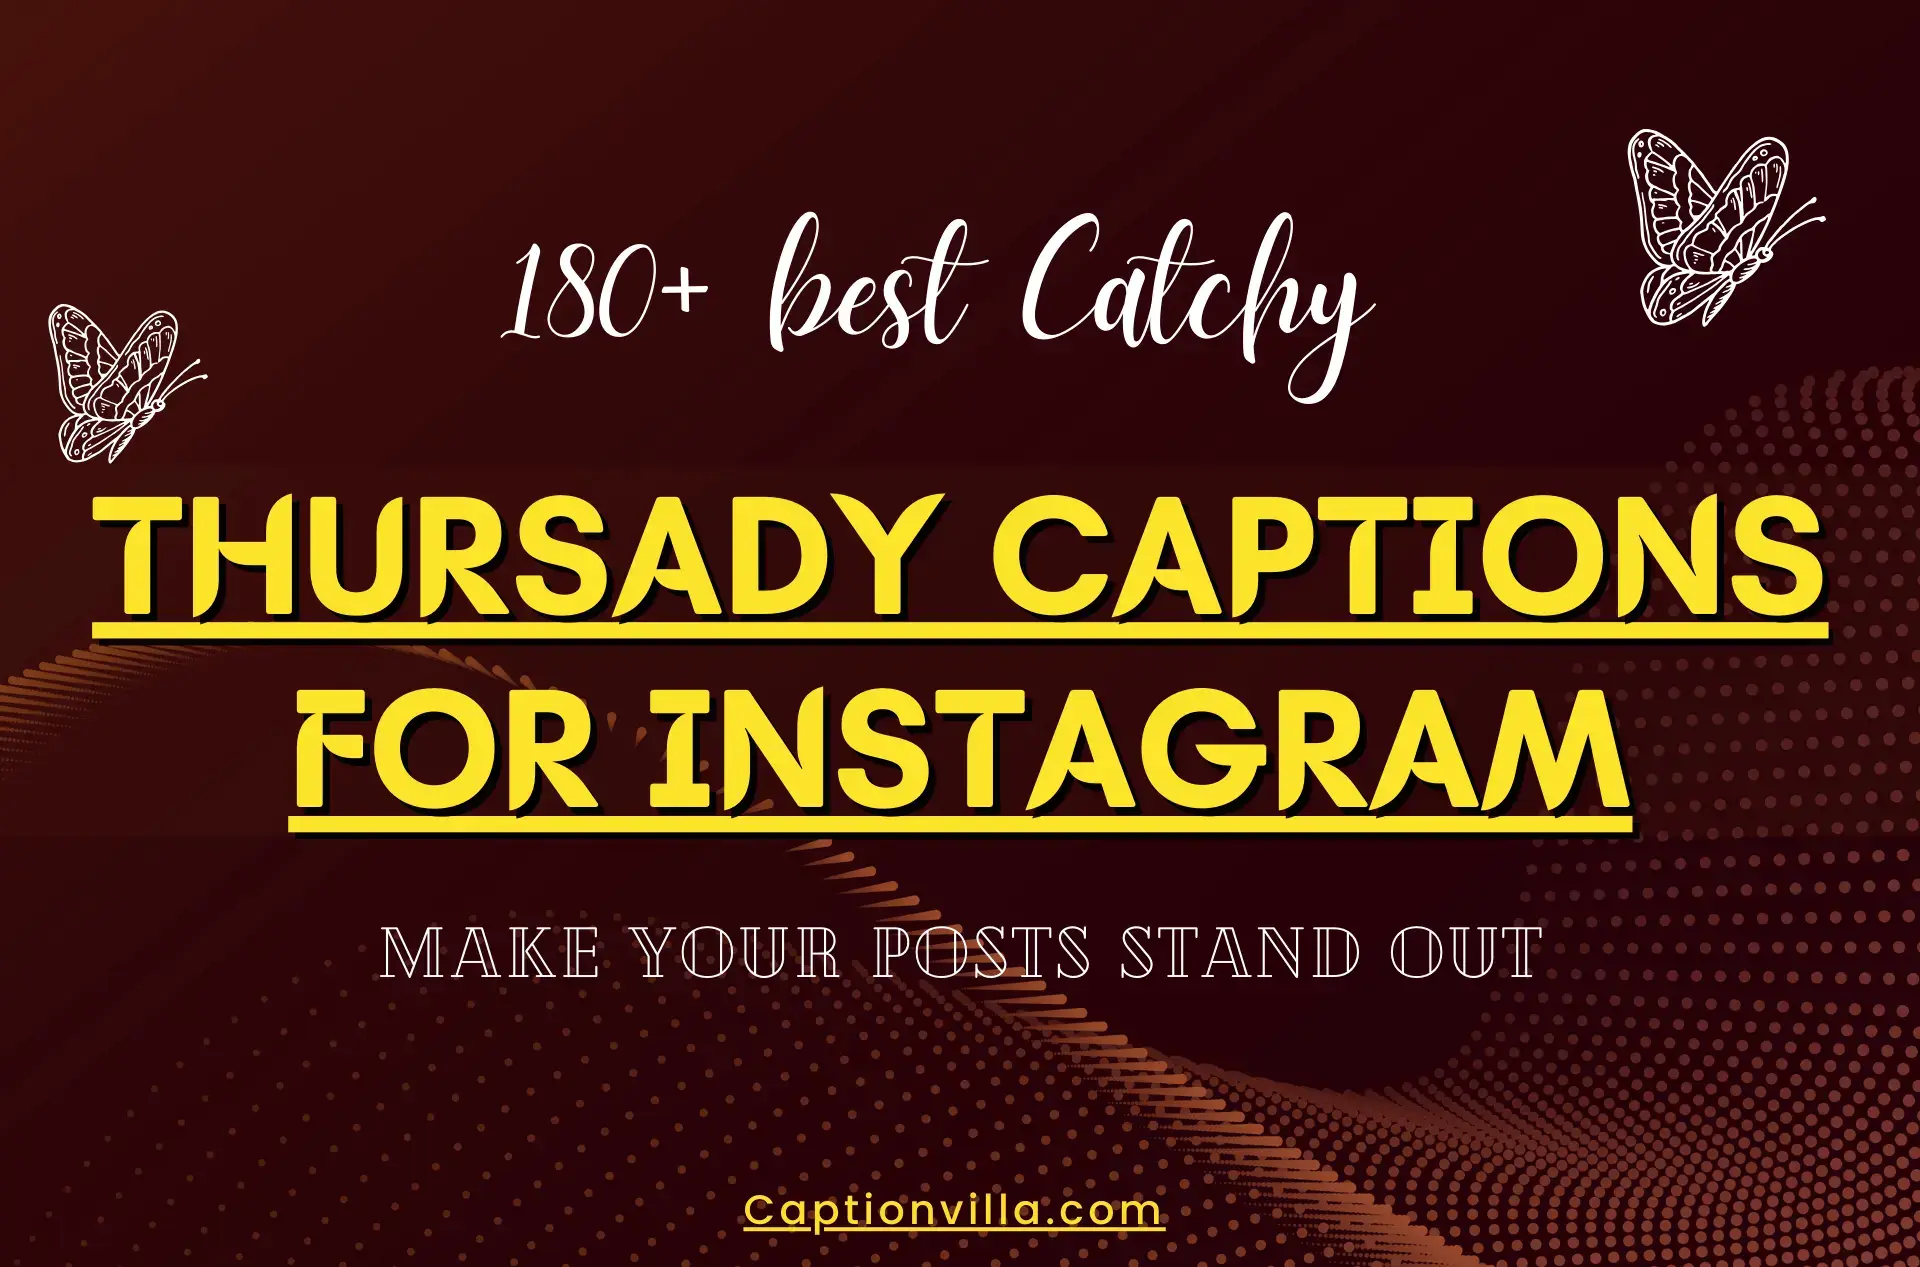 Thumbnails of the best catchy captions and Thursday Captions for Instagram.